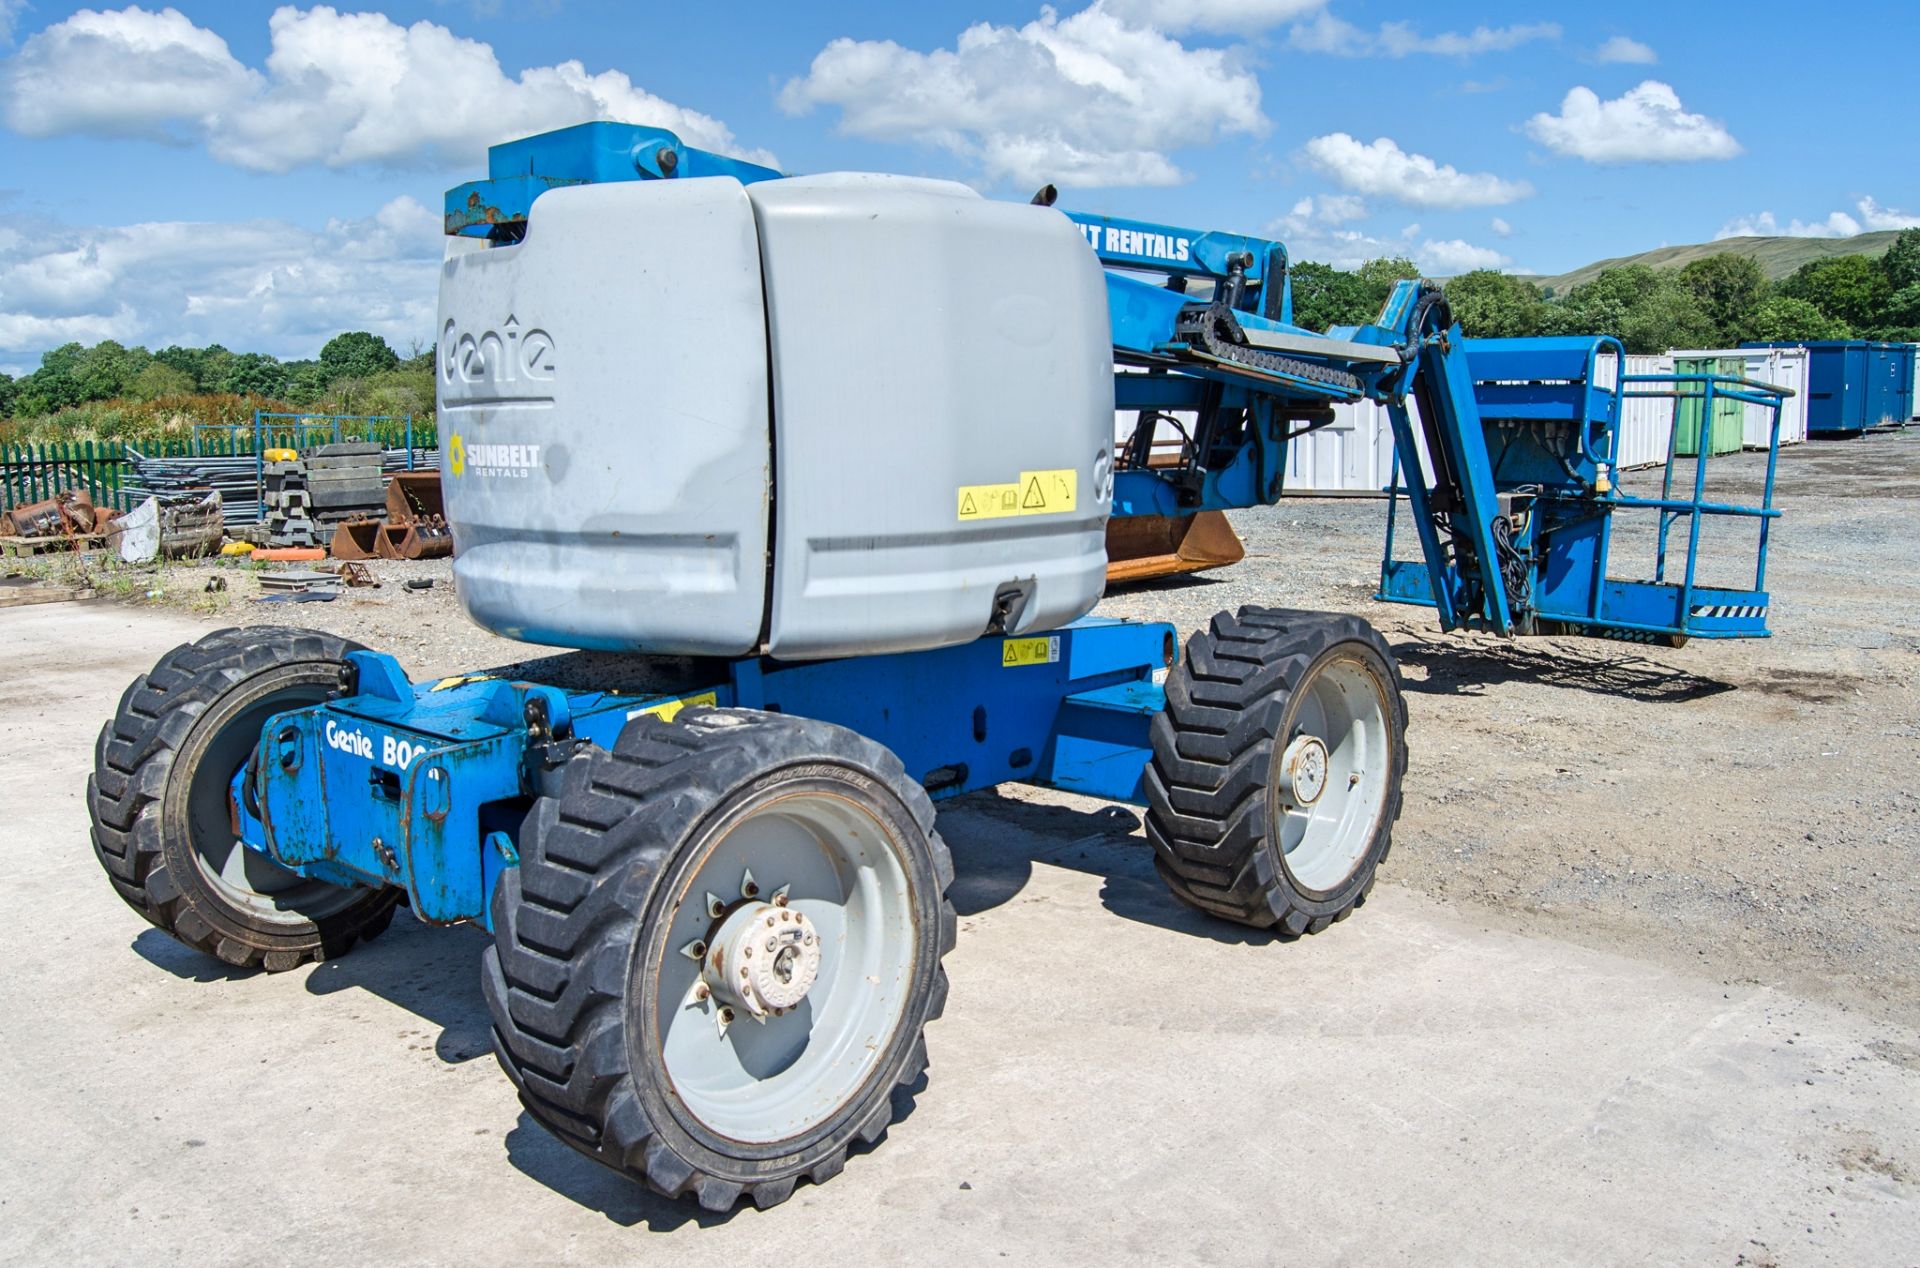 Genie Z-45/25 battery electric/diesel 4WD articulated boom lift Year: 2011 S/N: Z452512B-2013 - Image 3 of 18